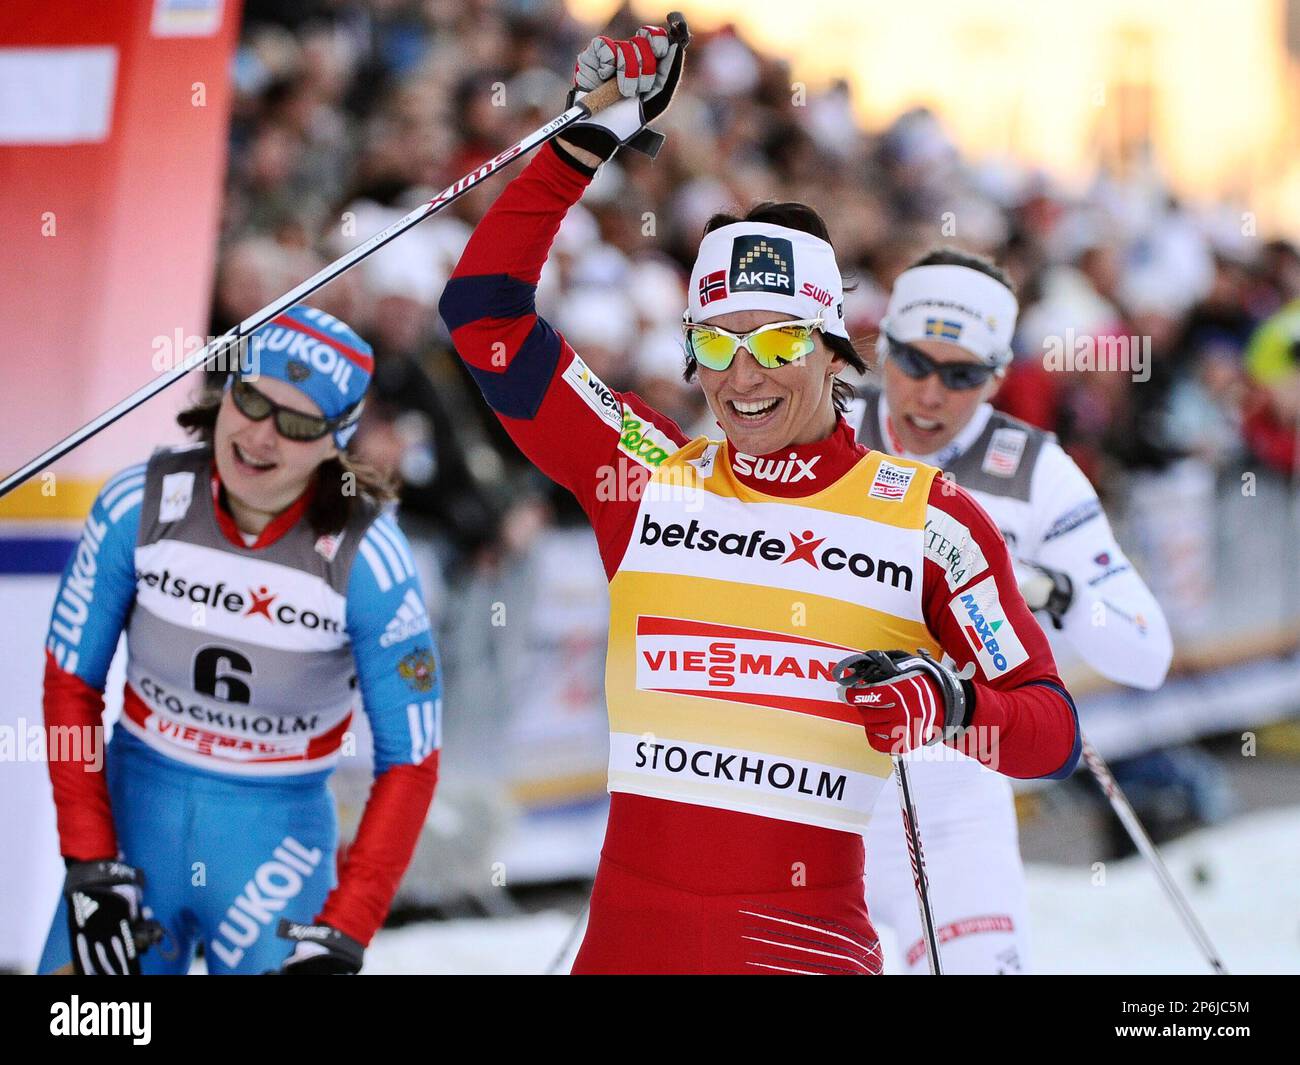 Norways Marit Borgen, center, celebrates her victory as Russias Julia Ivanova, left, placed second, during the FIS Cross-Country World Cup 1,0km classic sprint final in Stockholm, Wednesday March 14, 2012